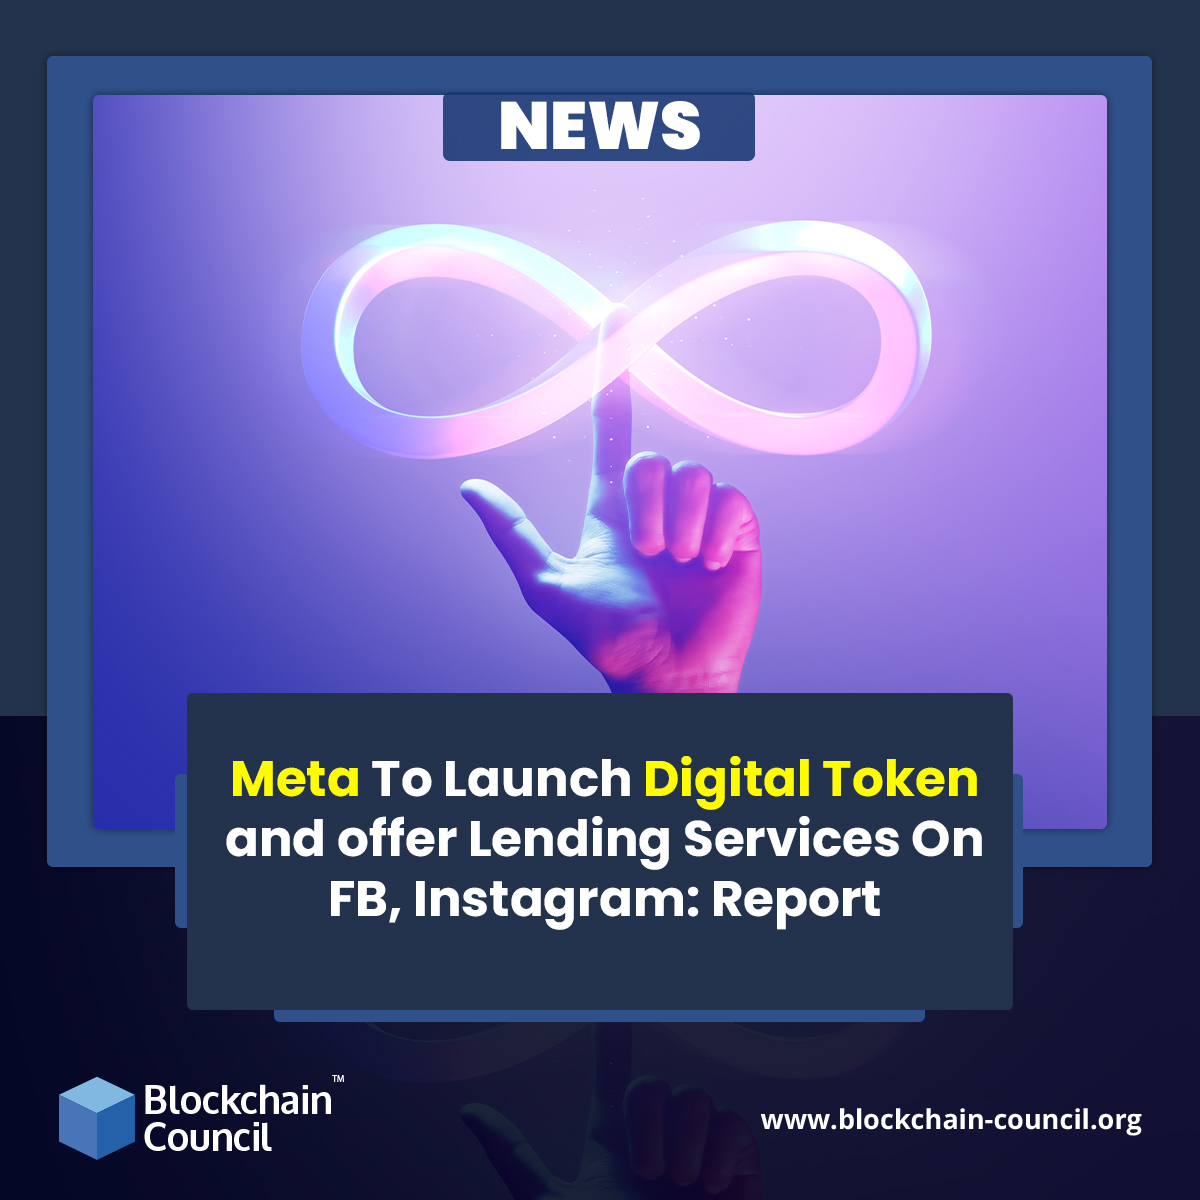 Meta To Launch Digital Token and offer Lending Services On FB, Instagram Report